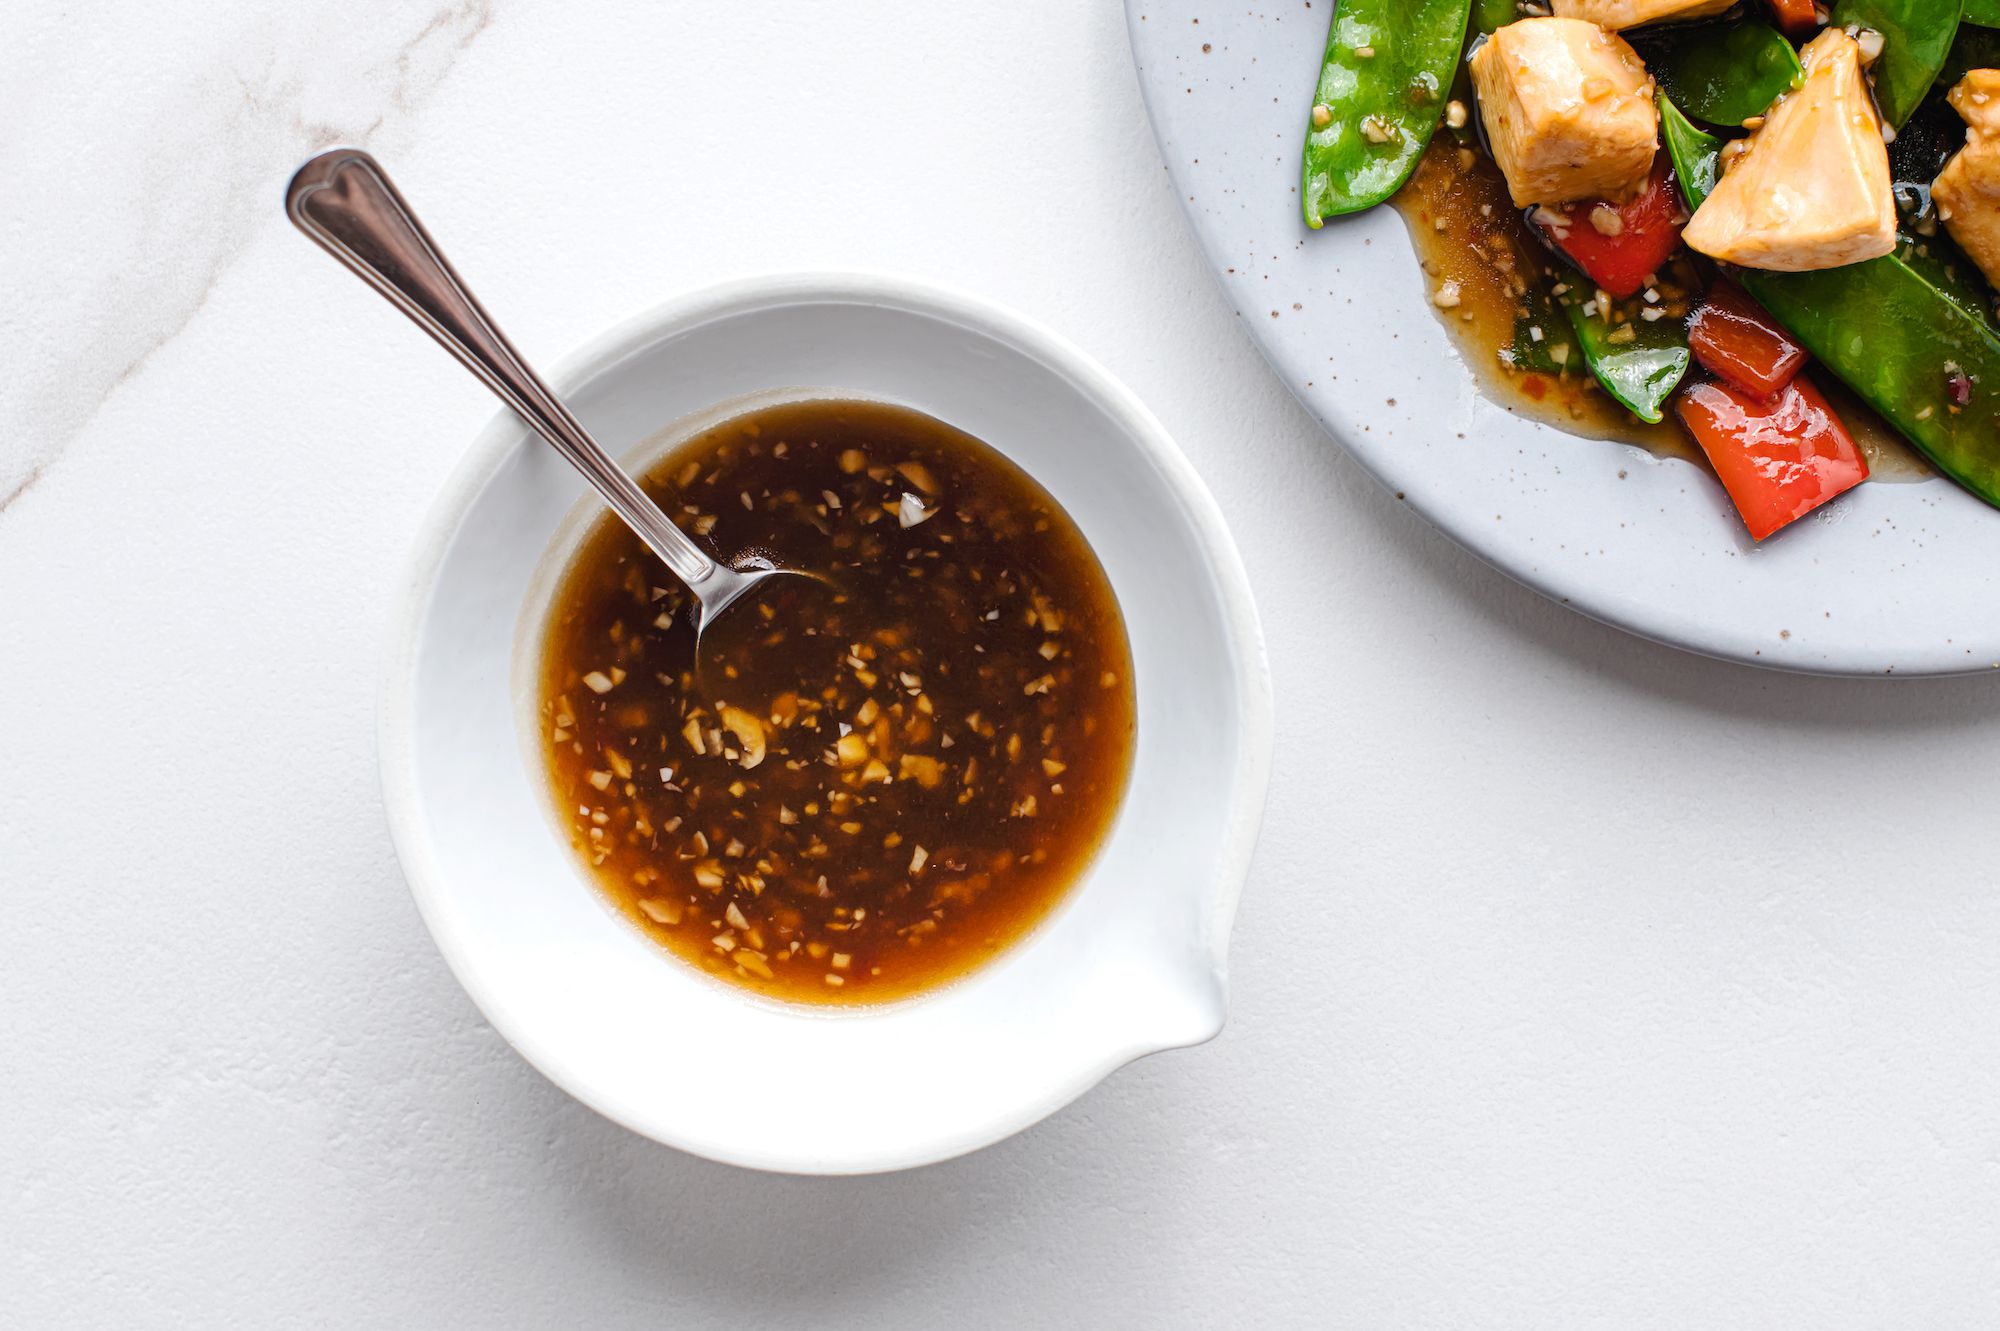 A Chinese Garlic Sauce for All Your Favorite Stir-Fries